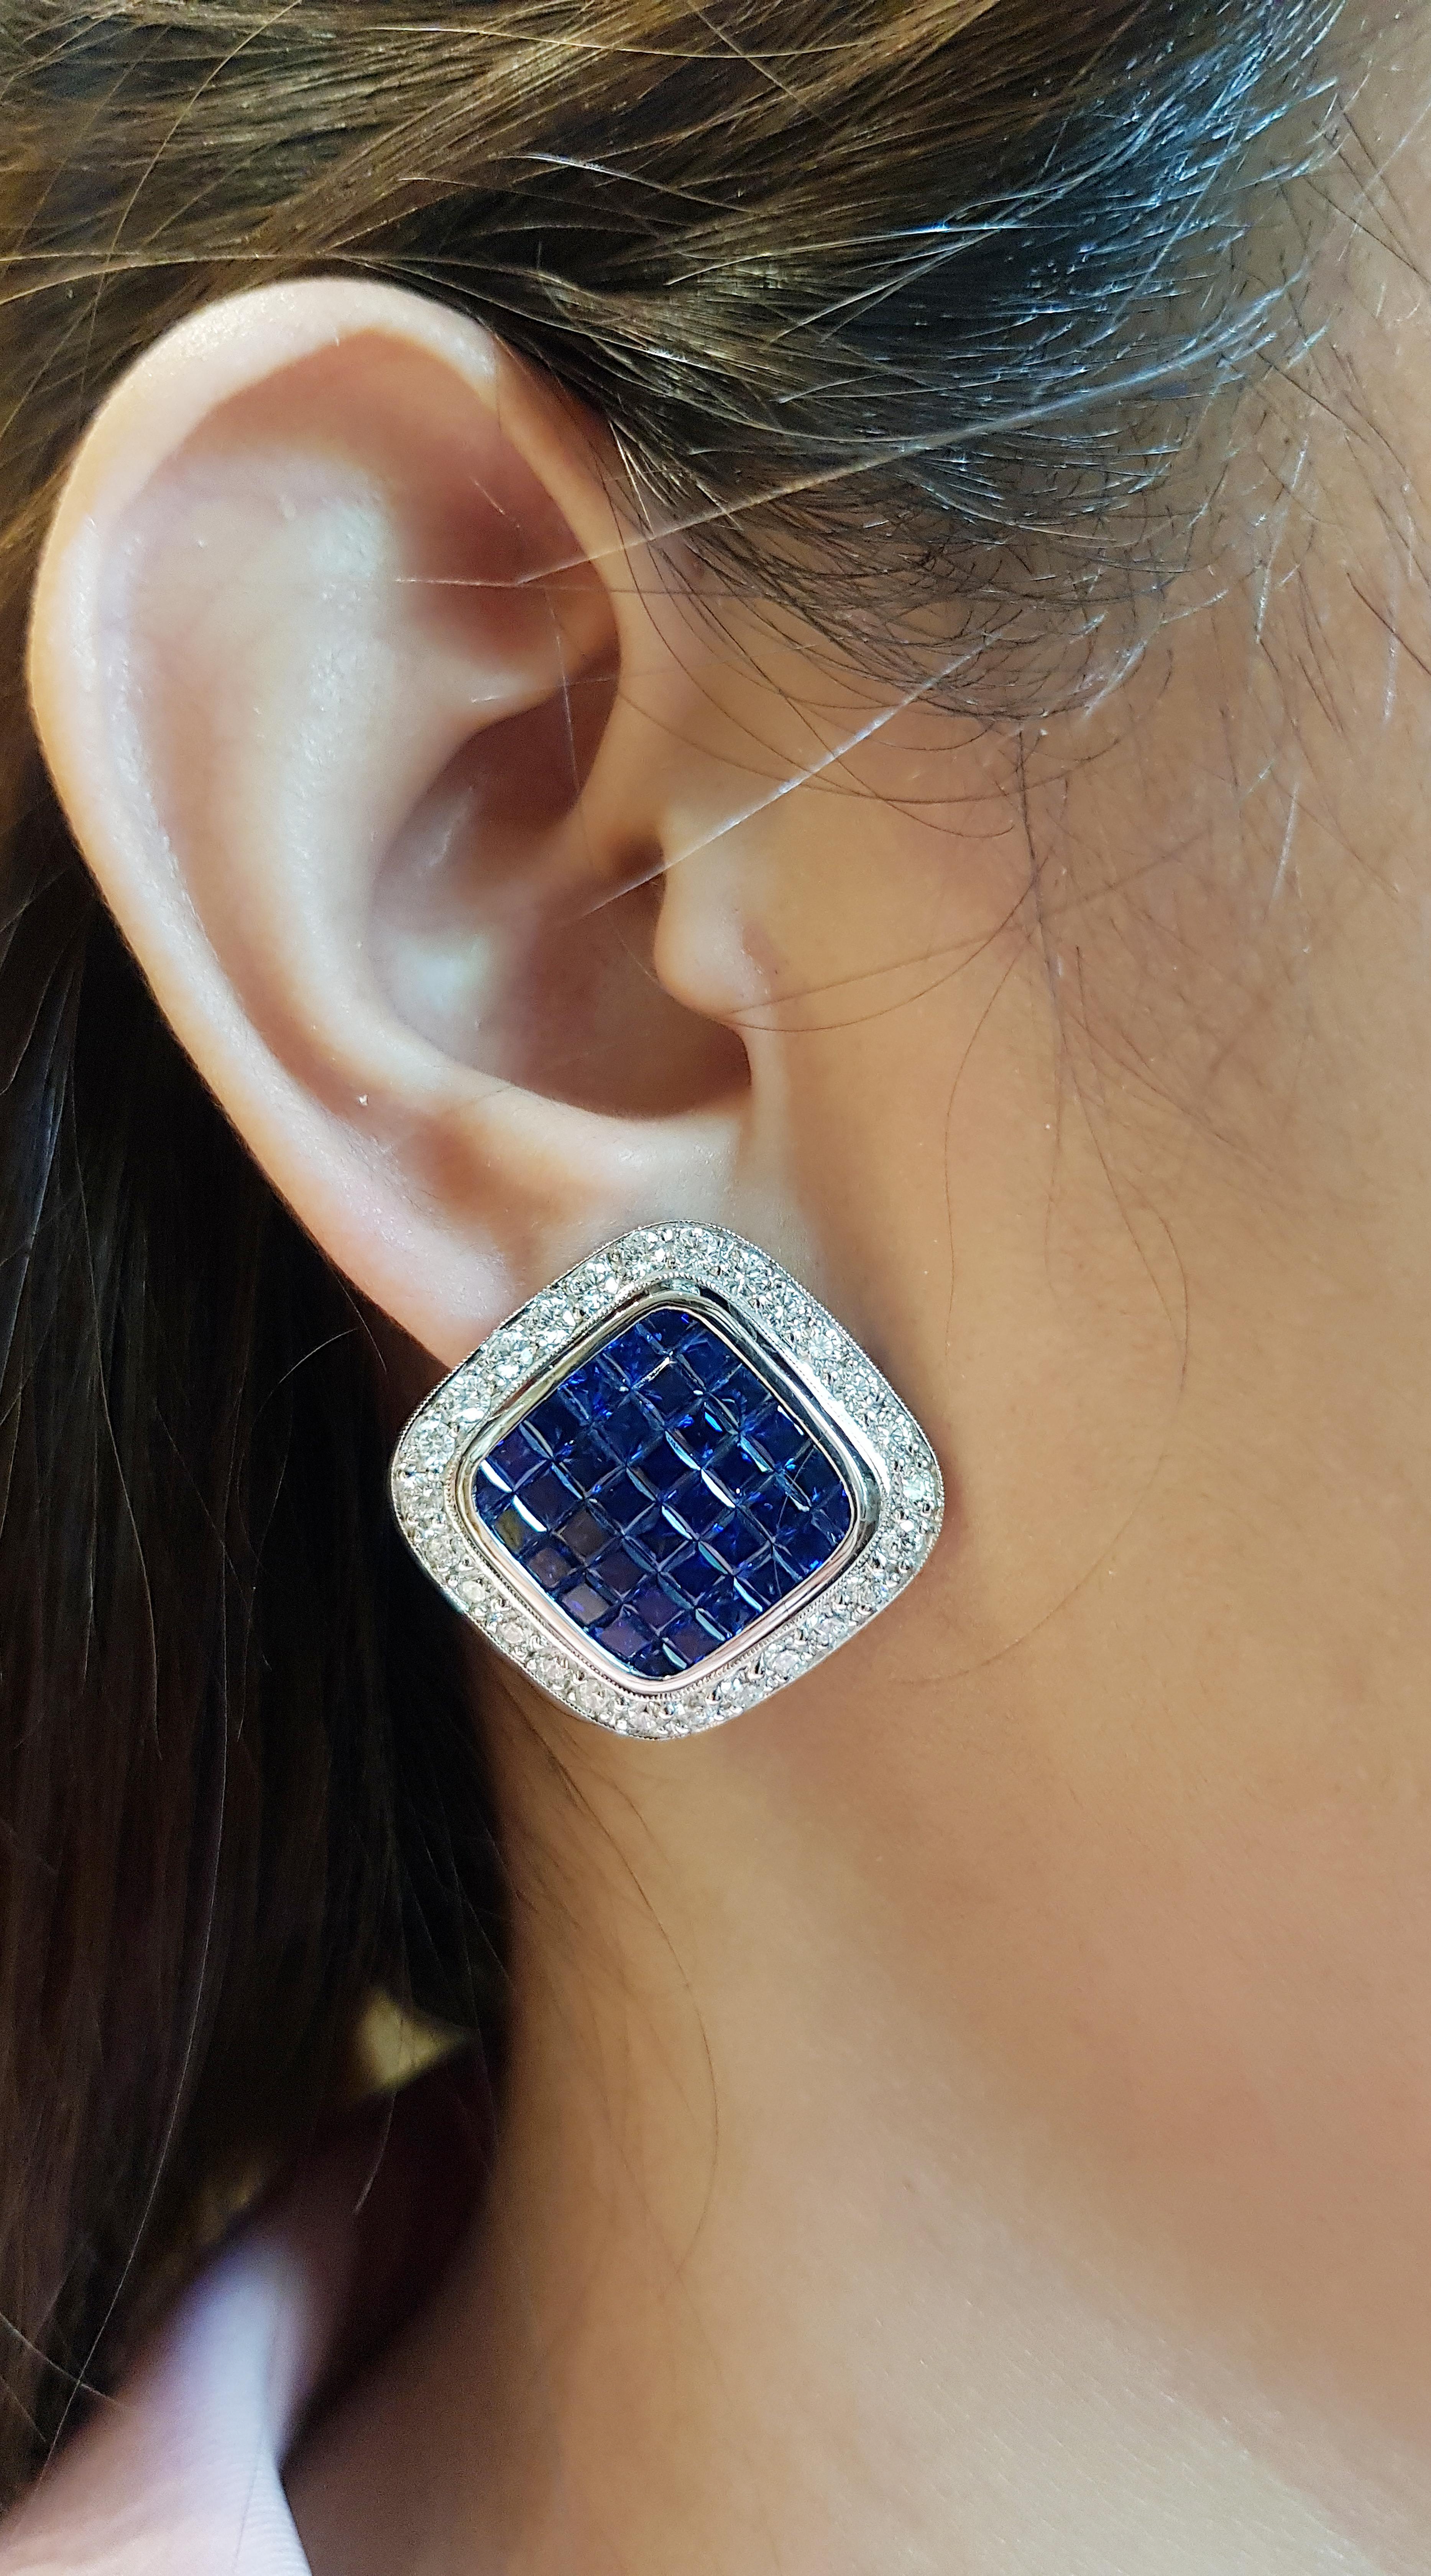 Blue Sapphire 11.07 carats with Diamond 2.31 carats Earrings set in 18 Karat White Gold Settings

Width:  2.8 cm 
Length: 2.8 cm
Total Weight: 24.66 grams

